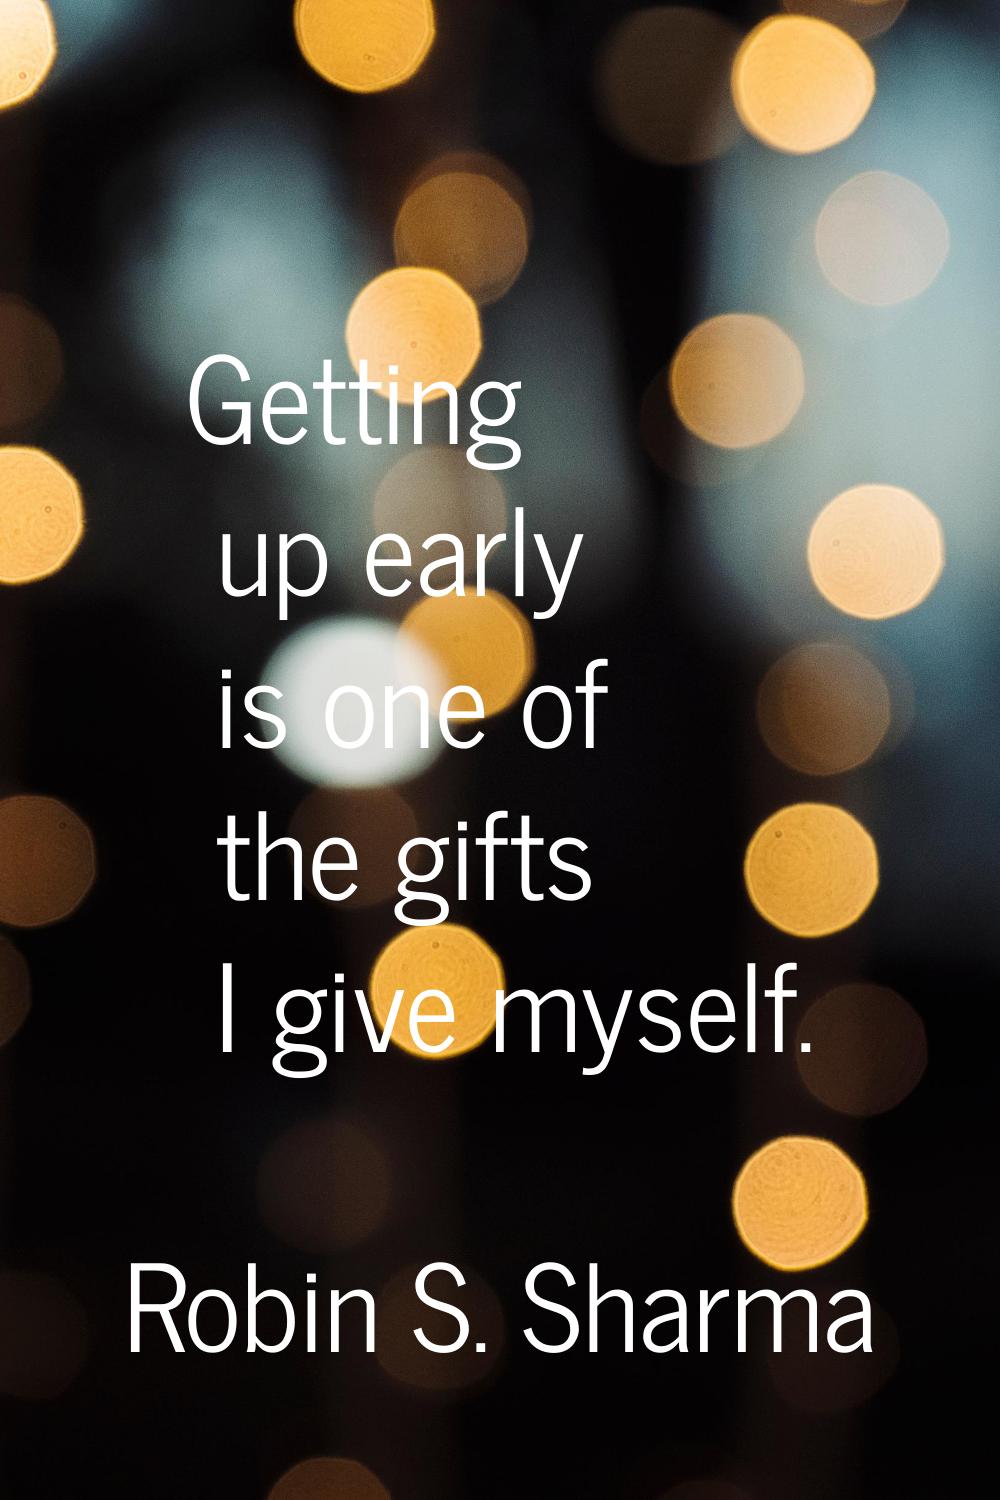 Getting up early is one of the gifts I give myself.